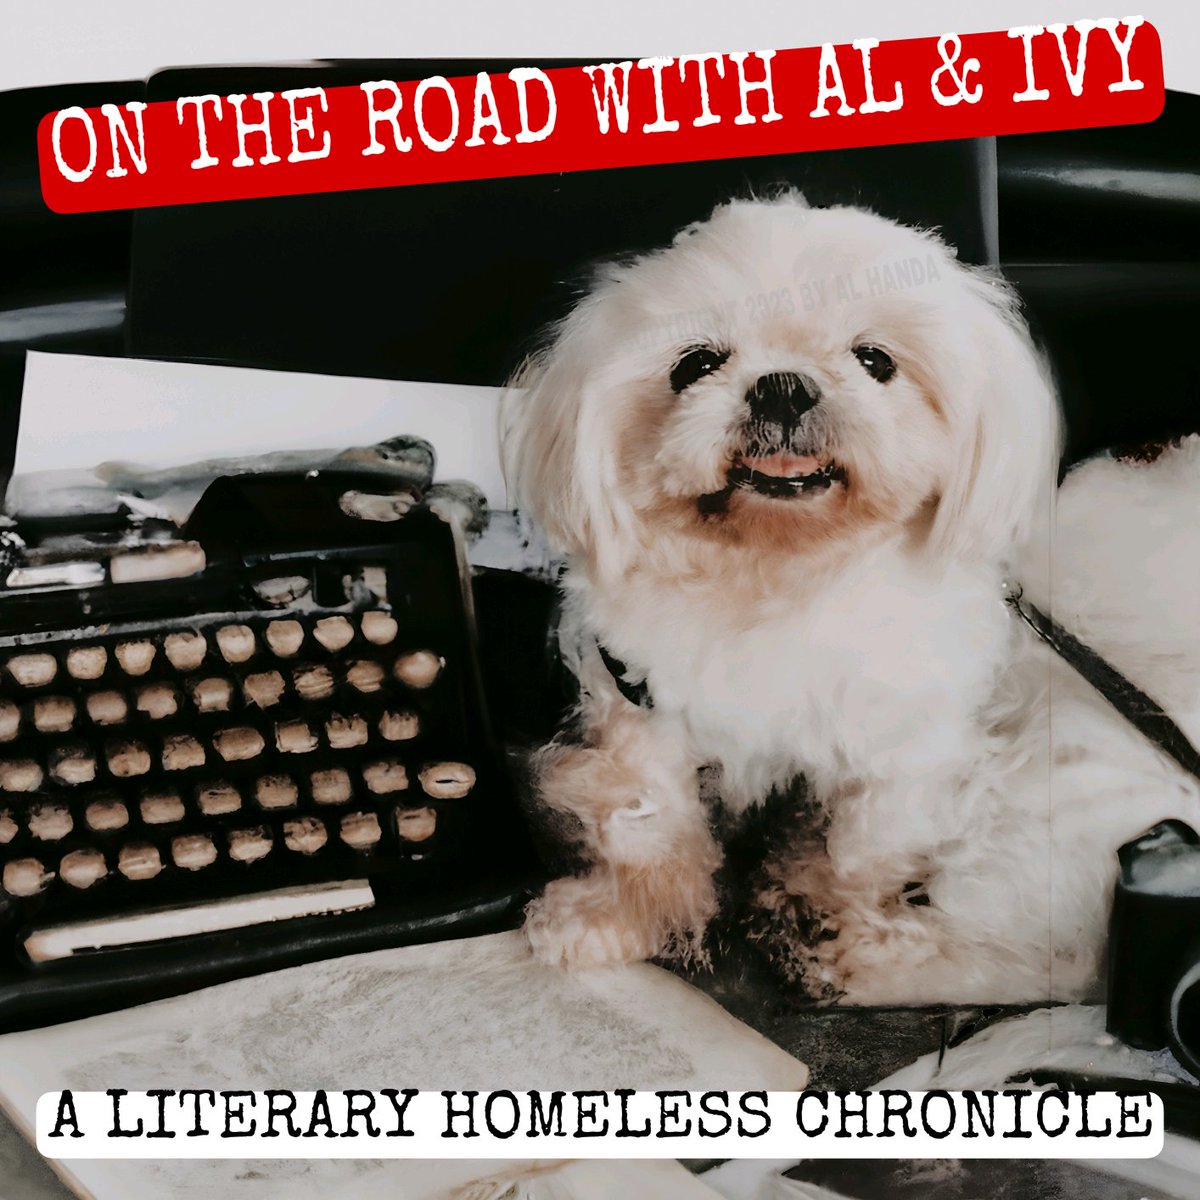 On The Road With Al and Ivy: September 2023 Compilation Issue: A.I. and Art parts 1-3, Preview of Knee Deep In Glory, Preview of 2nd Edition of On The Road With Al & Ivy: The Anthology 2016-2018, rock bootlegs, A.I., Tik Tok, the rise of the 15 sec short ontheroadwithalandivy.blogspot.com/2023/09/on-roa…